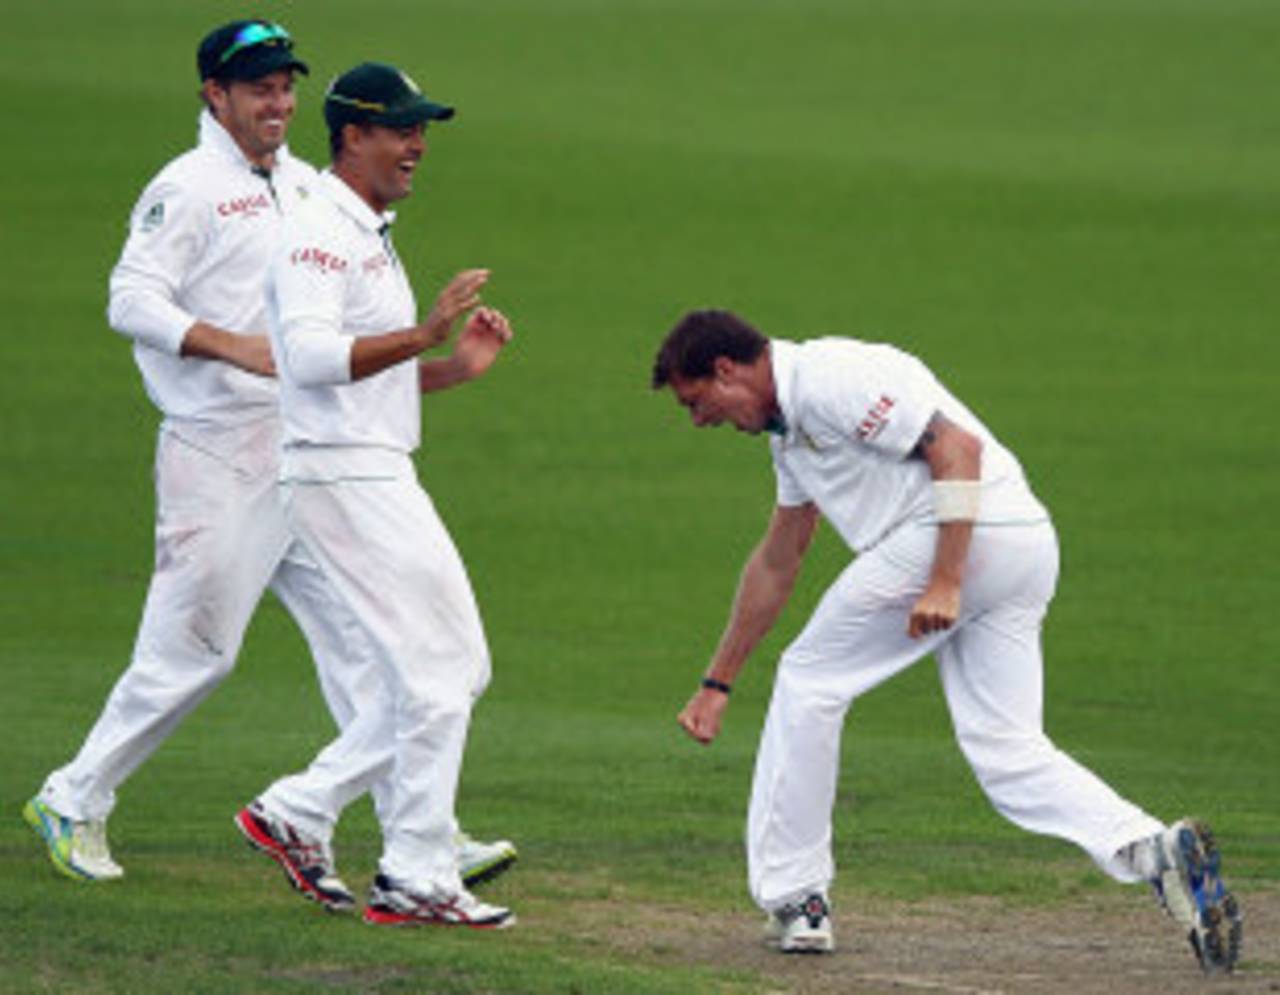 Dale Steyn celebrates a wicket, New Zealand v South Africa, 2nd Test, Hamilton, 1st day, March 15, 2012